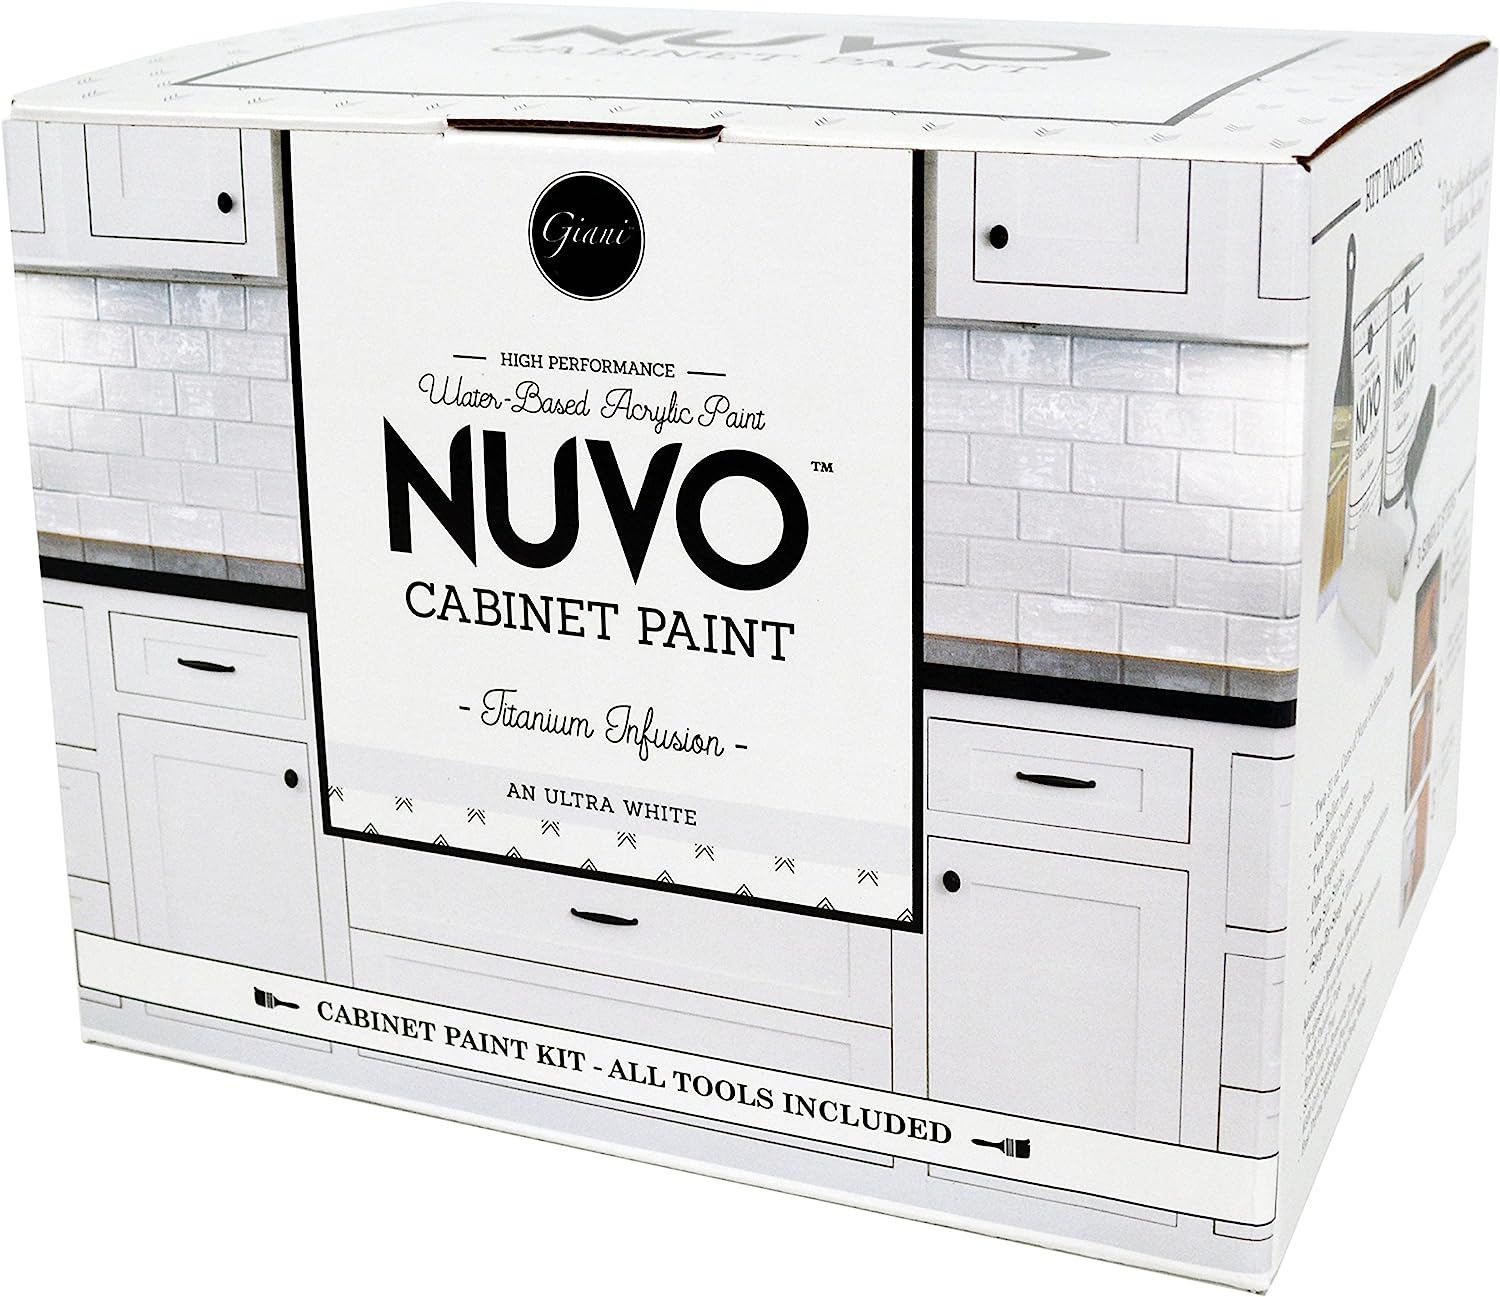 kind of paint for kitchen cabinets product review